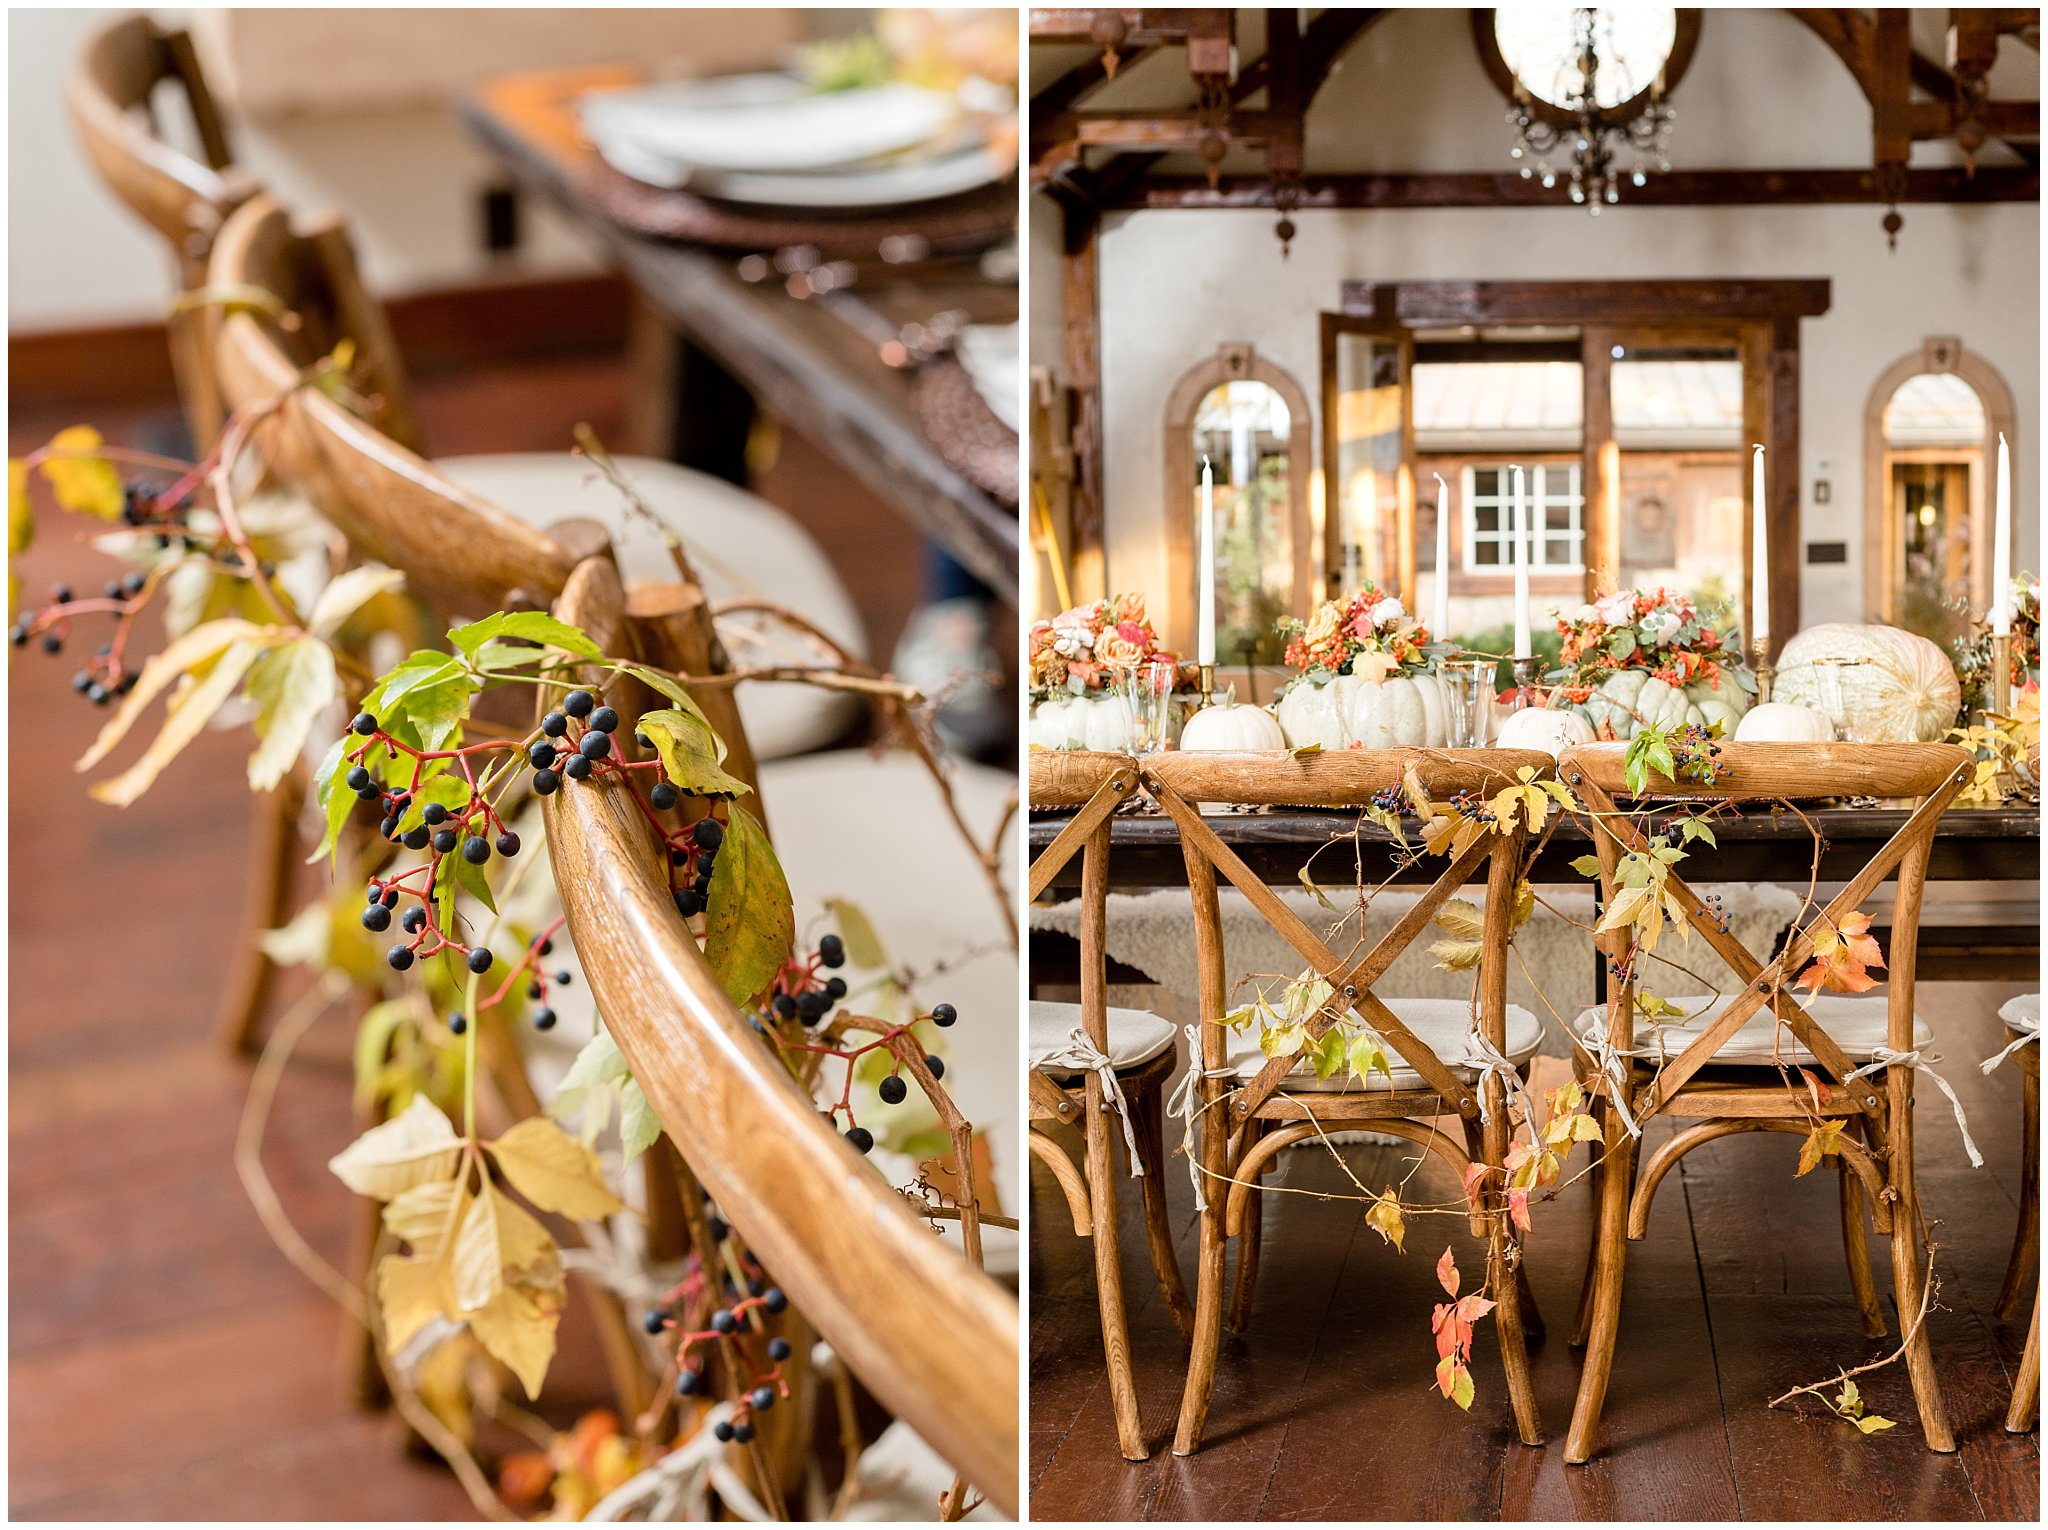 Fall leaves and berries garland decorating wedding table setting and chairs | Fall wedding inspiration | Wadley Farms Wedding Utah | Jessie and Dallin Photography